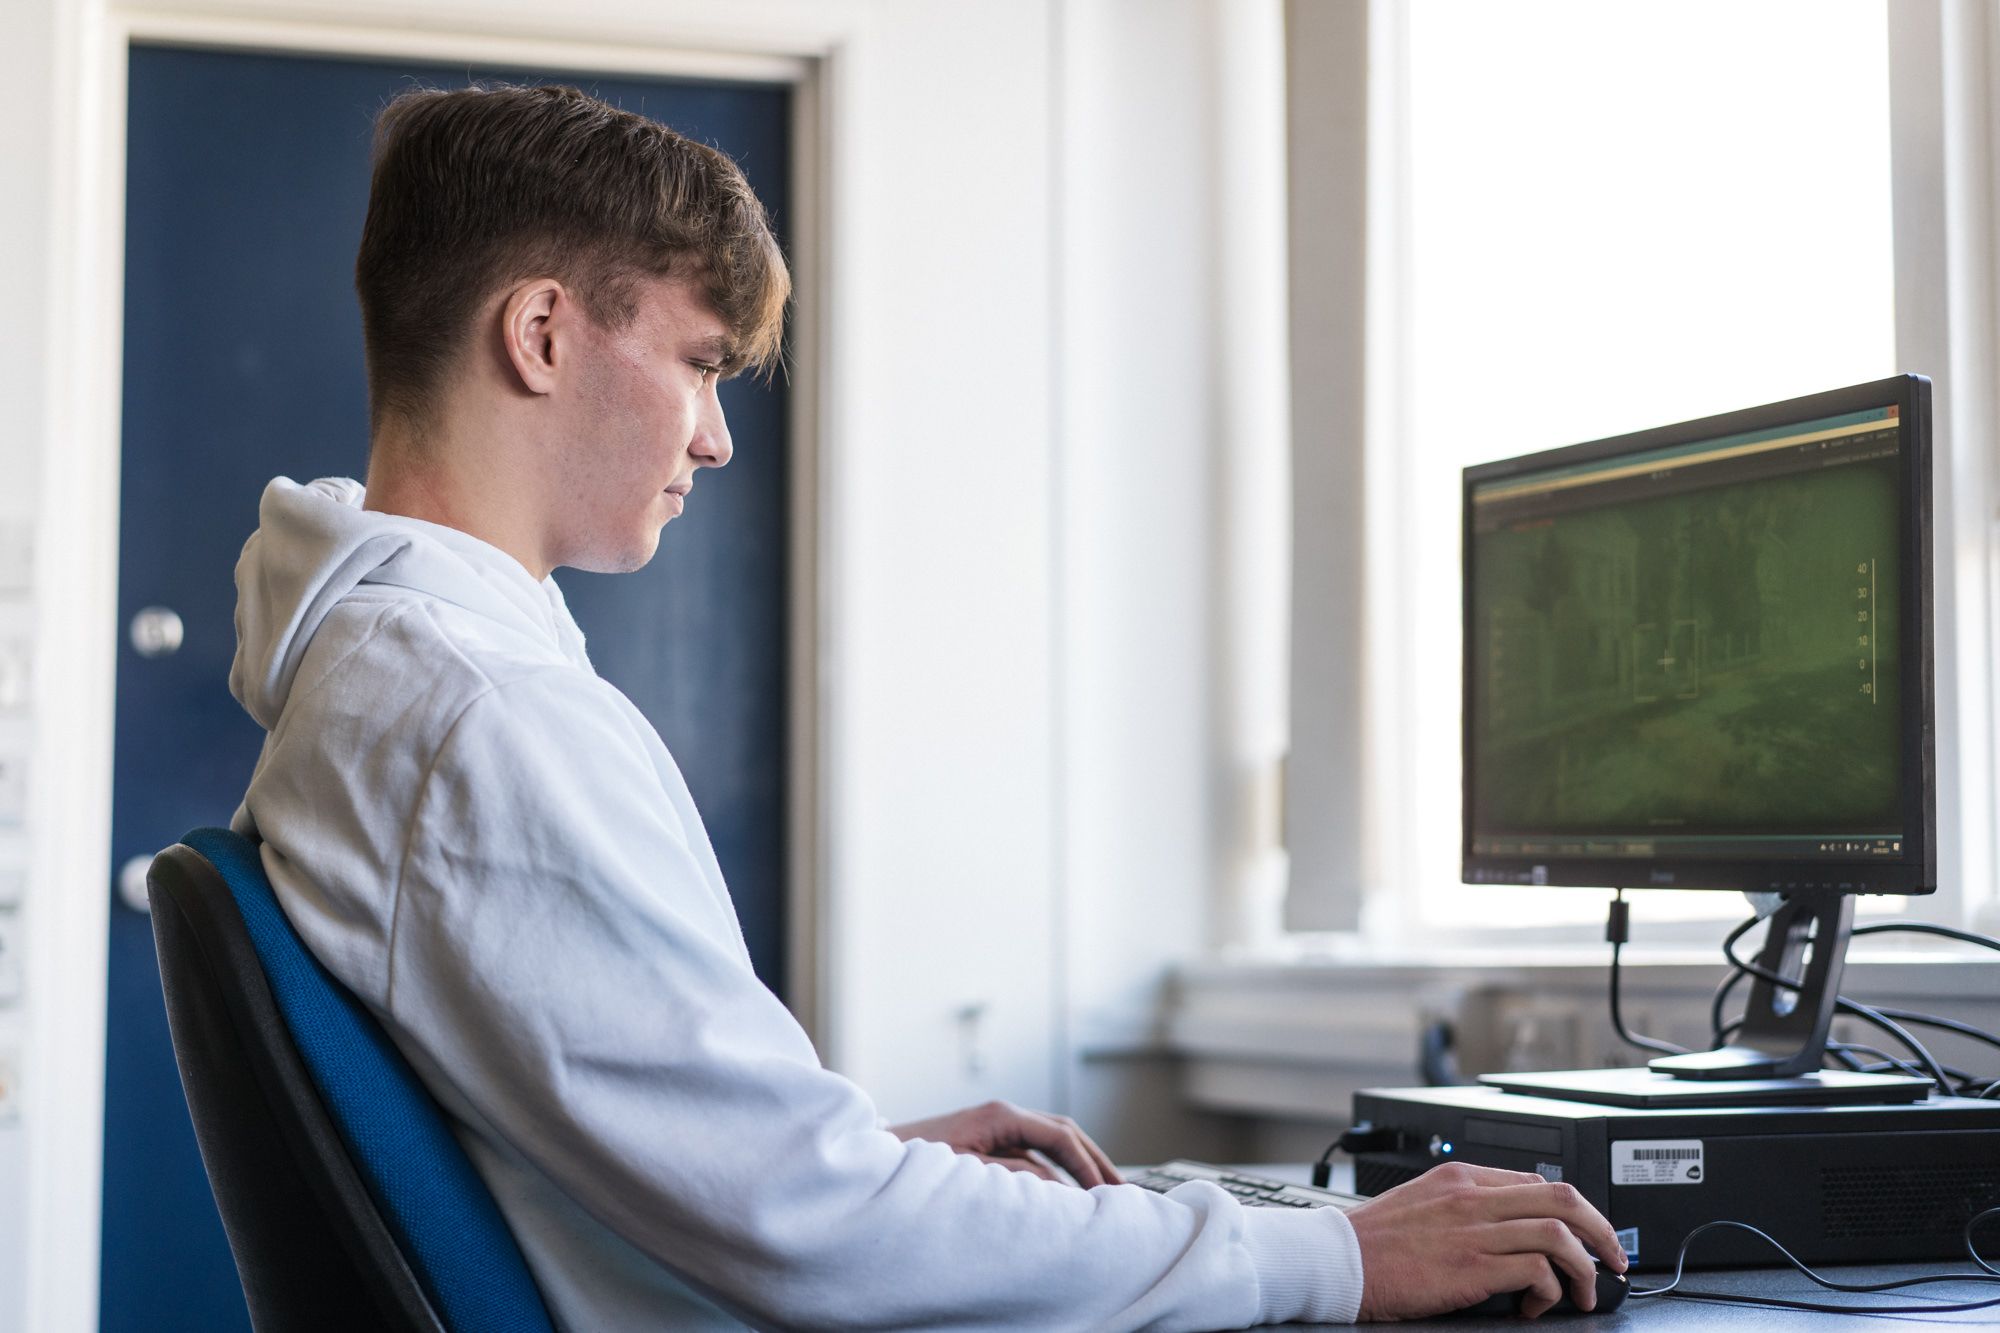 Male student on an esports course at HC sitting at a computer playing a game